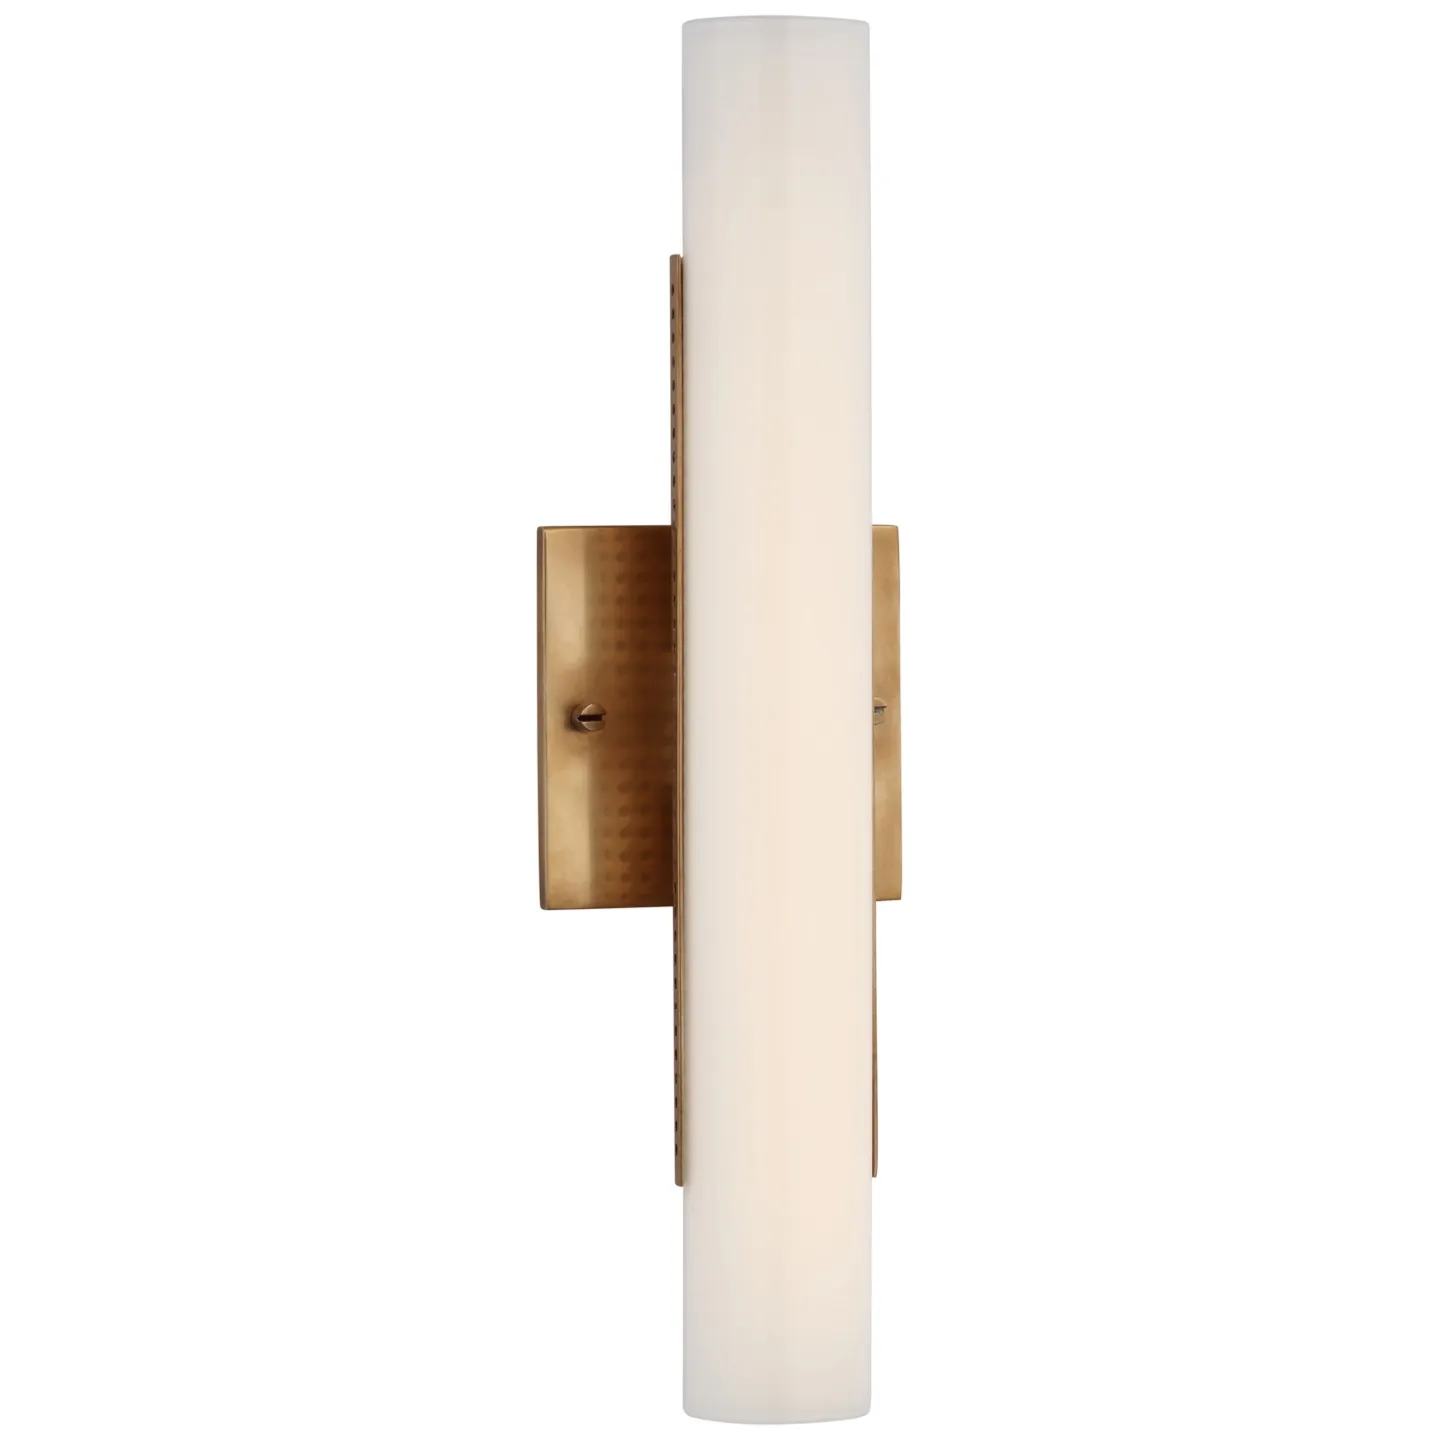 Precision 15" Bath Light in Antique-Burnished Brass with White Glass